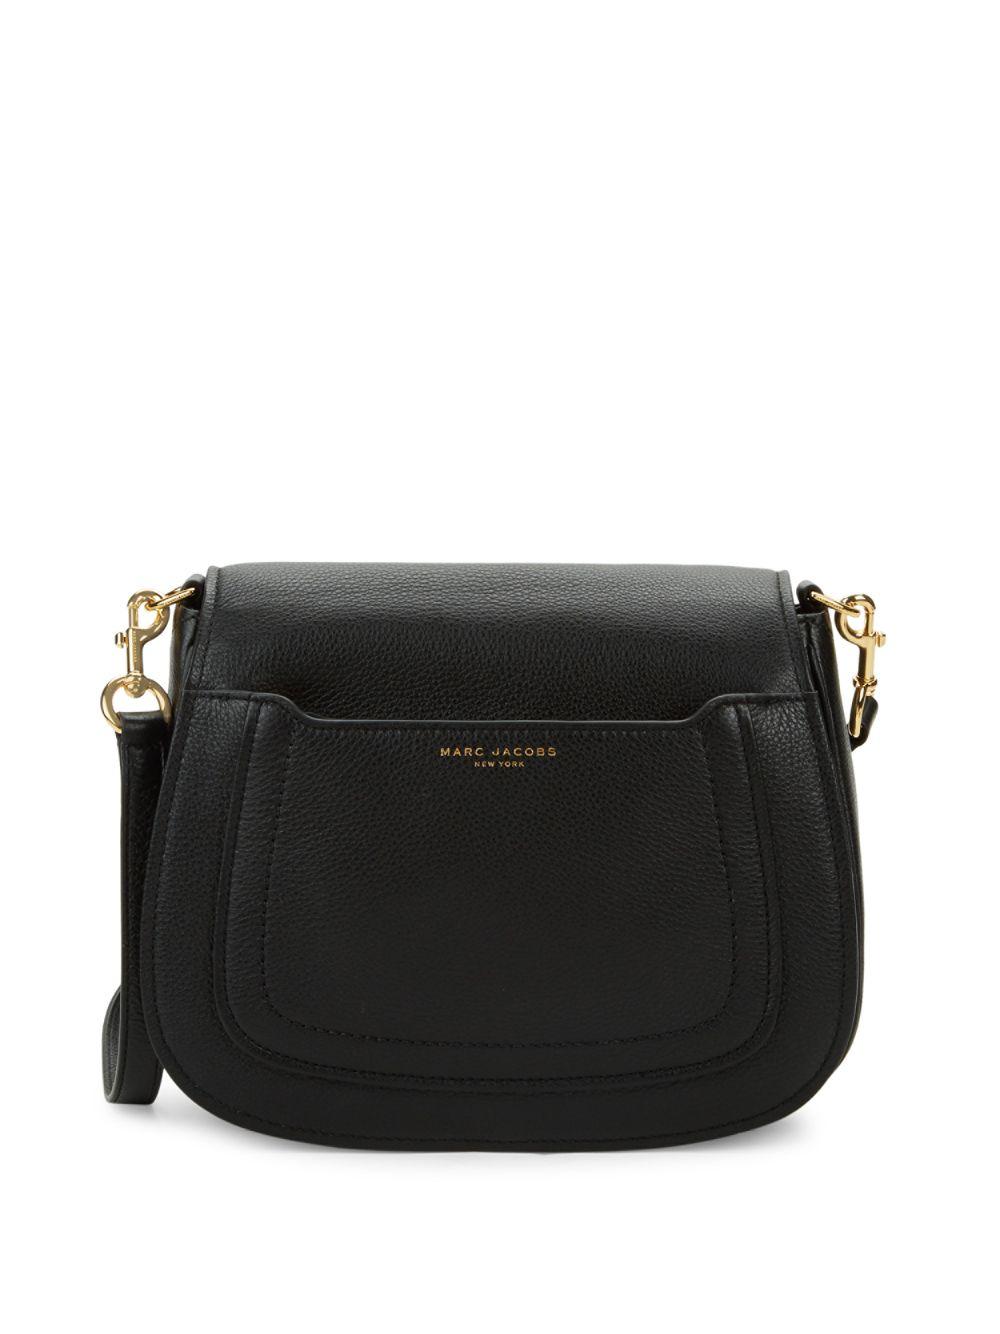 Marc Jacobs Pebbled Leather Saddle Crossbody Bag in Black - Lyst